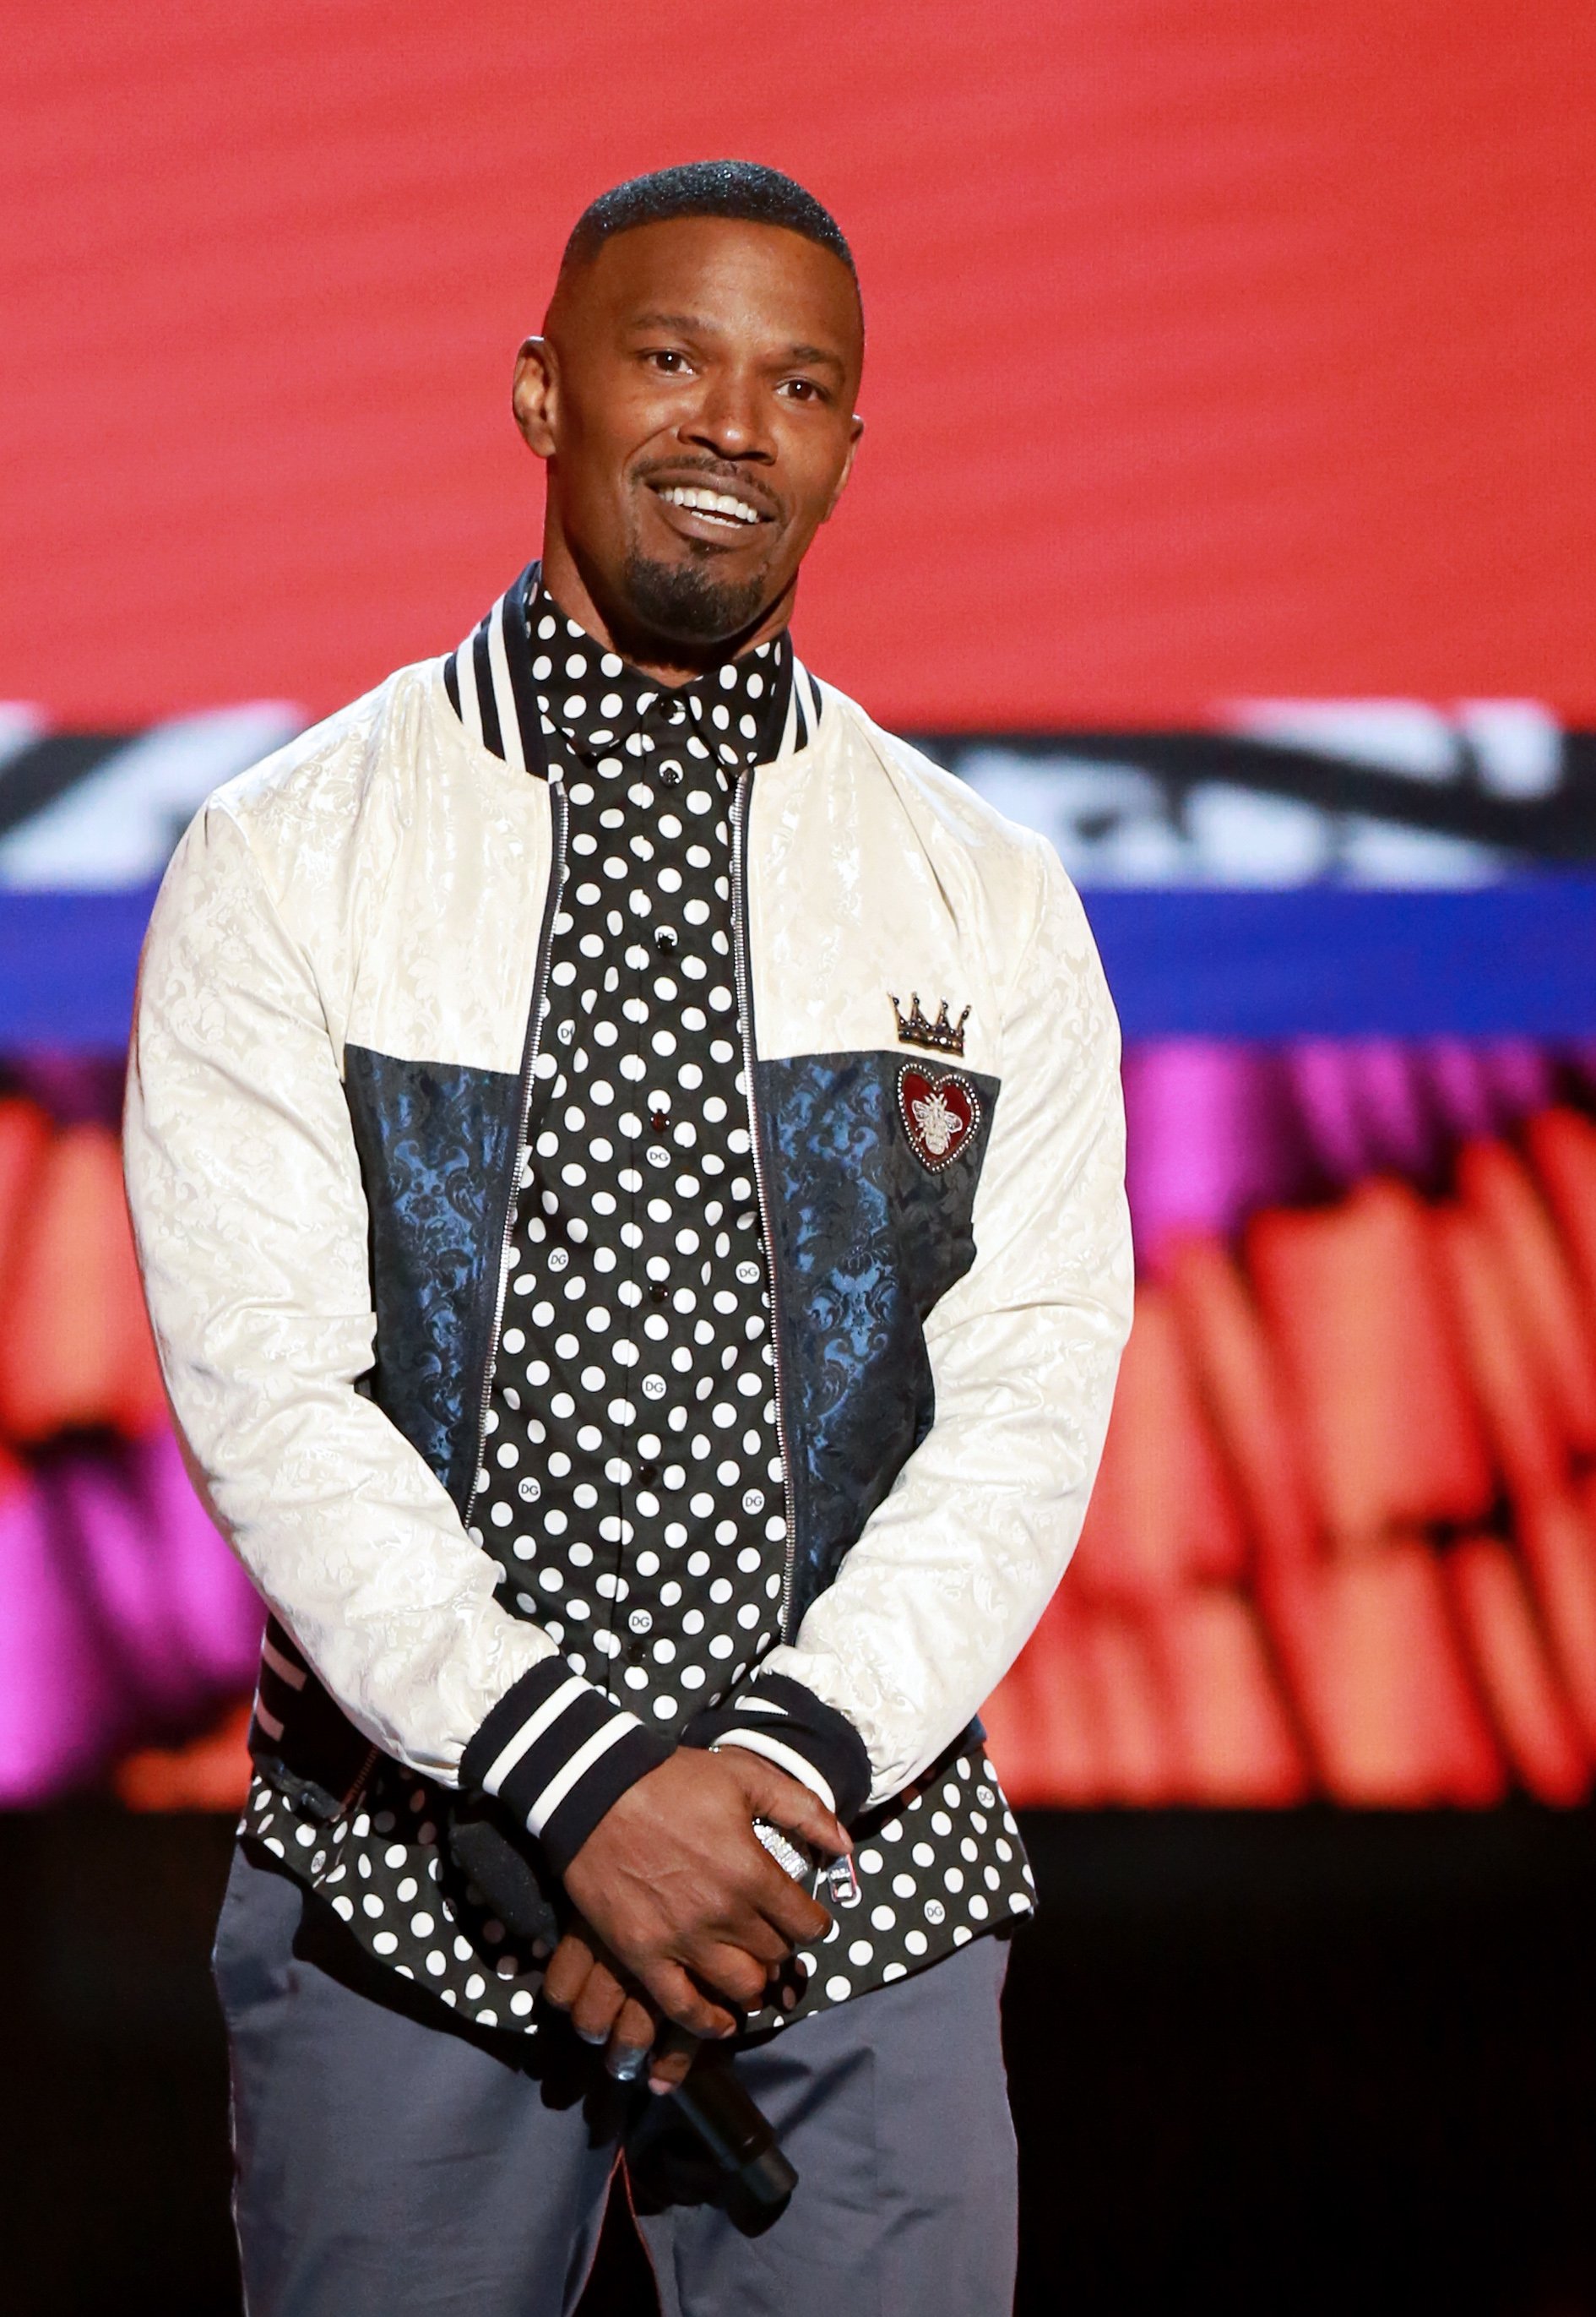 Jamie Foxx at the 2018 BET Awards show. | Photo: Getty Images